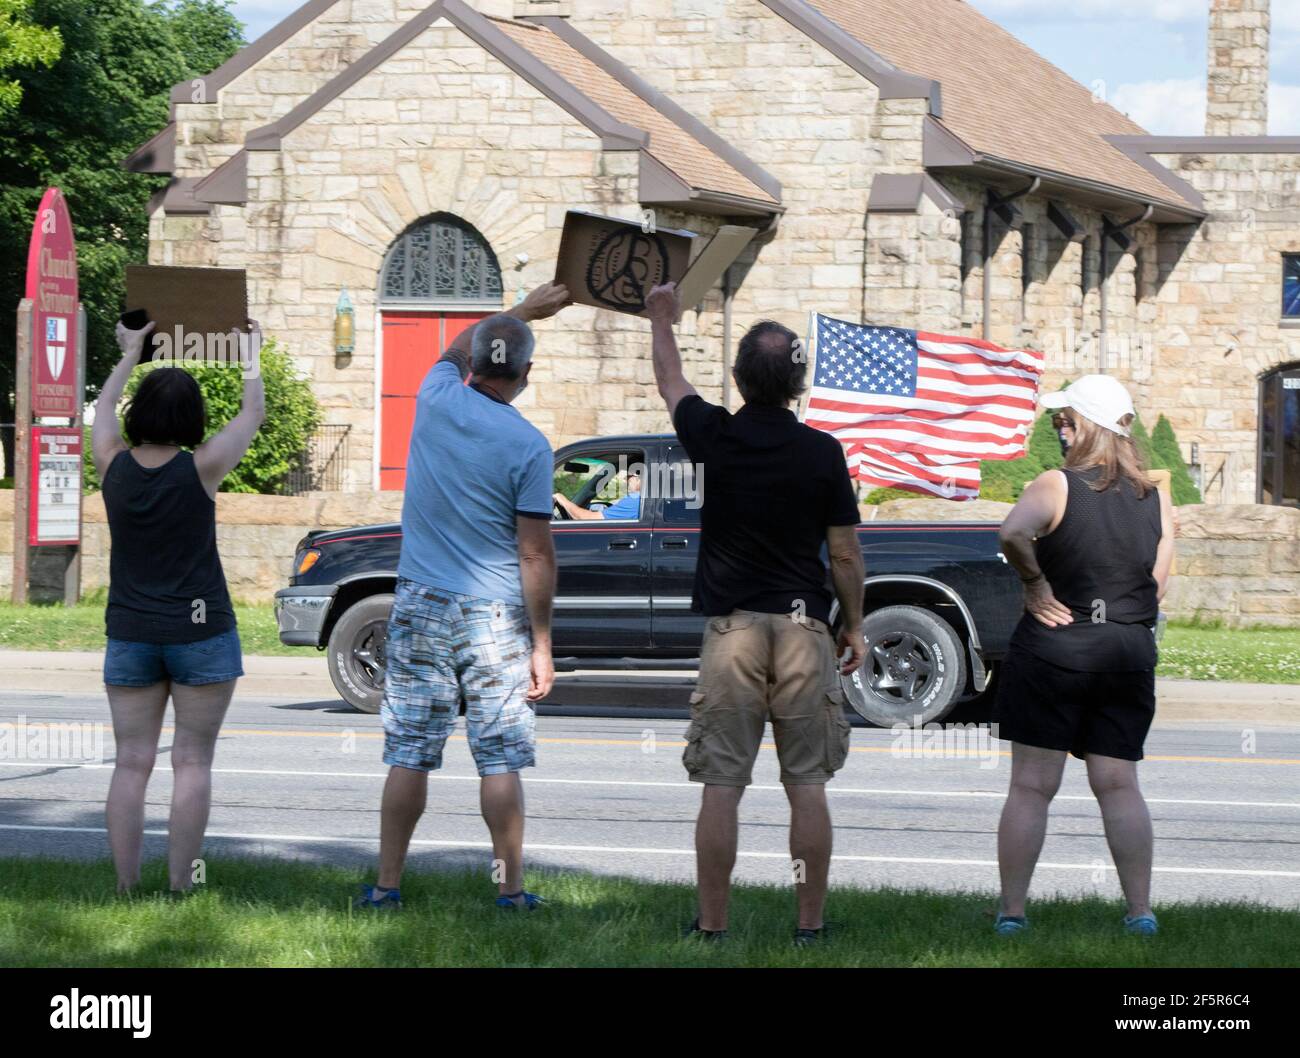 White Men and Women holding up peace sign during peaceful protest with truck and American flag driving by Stock Photo